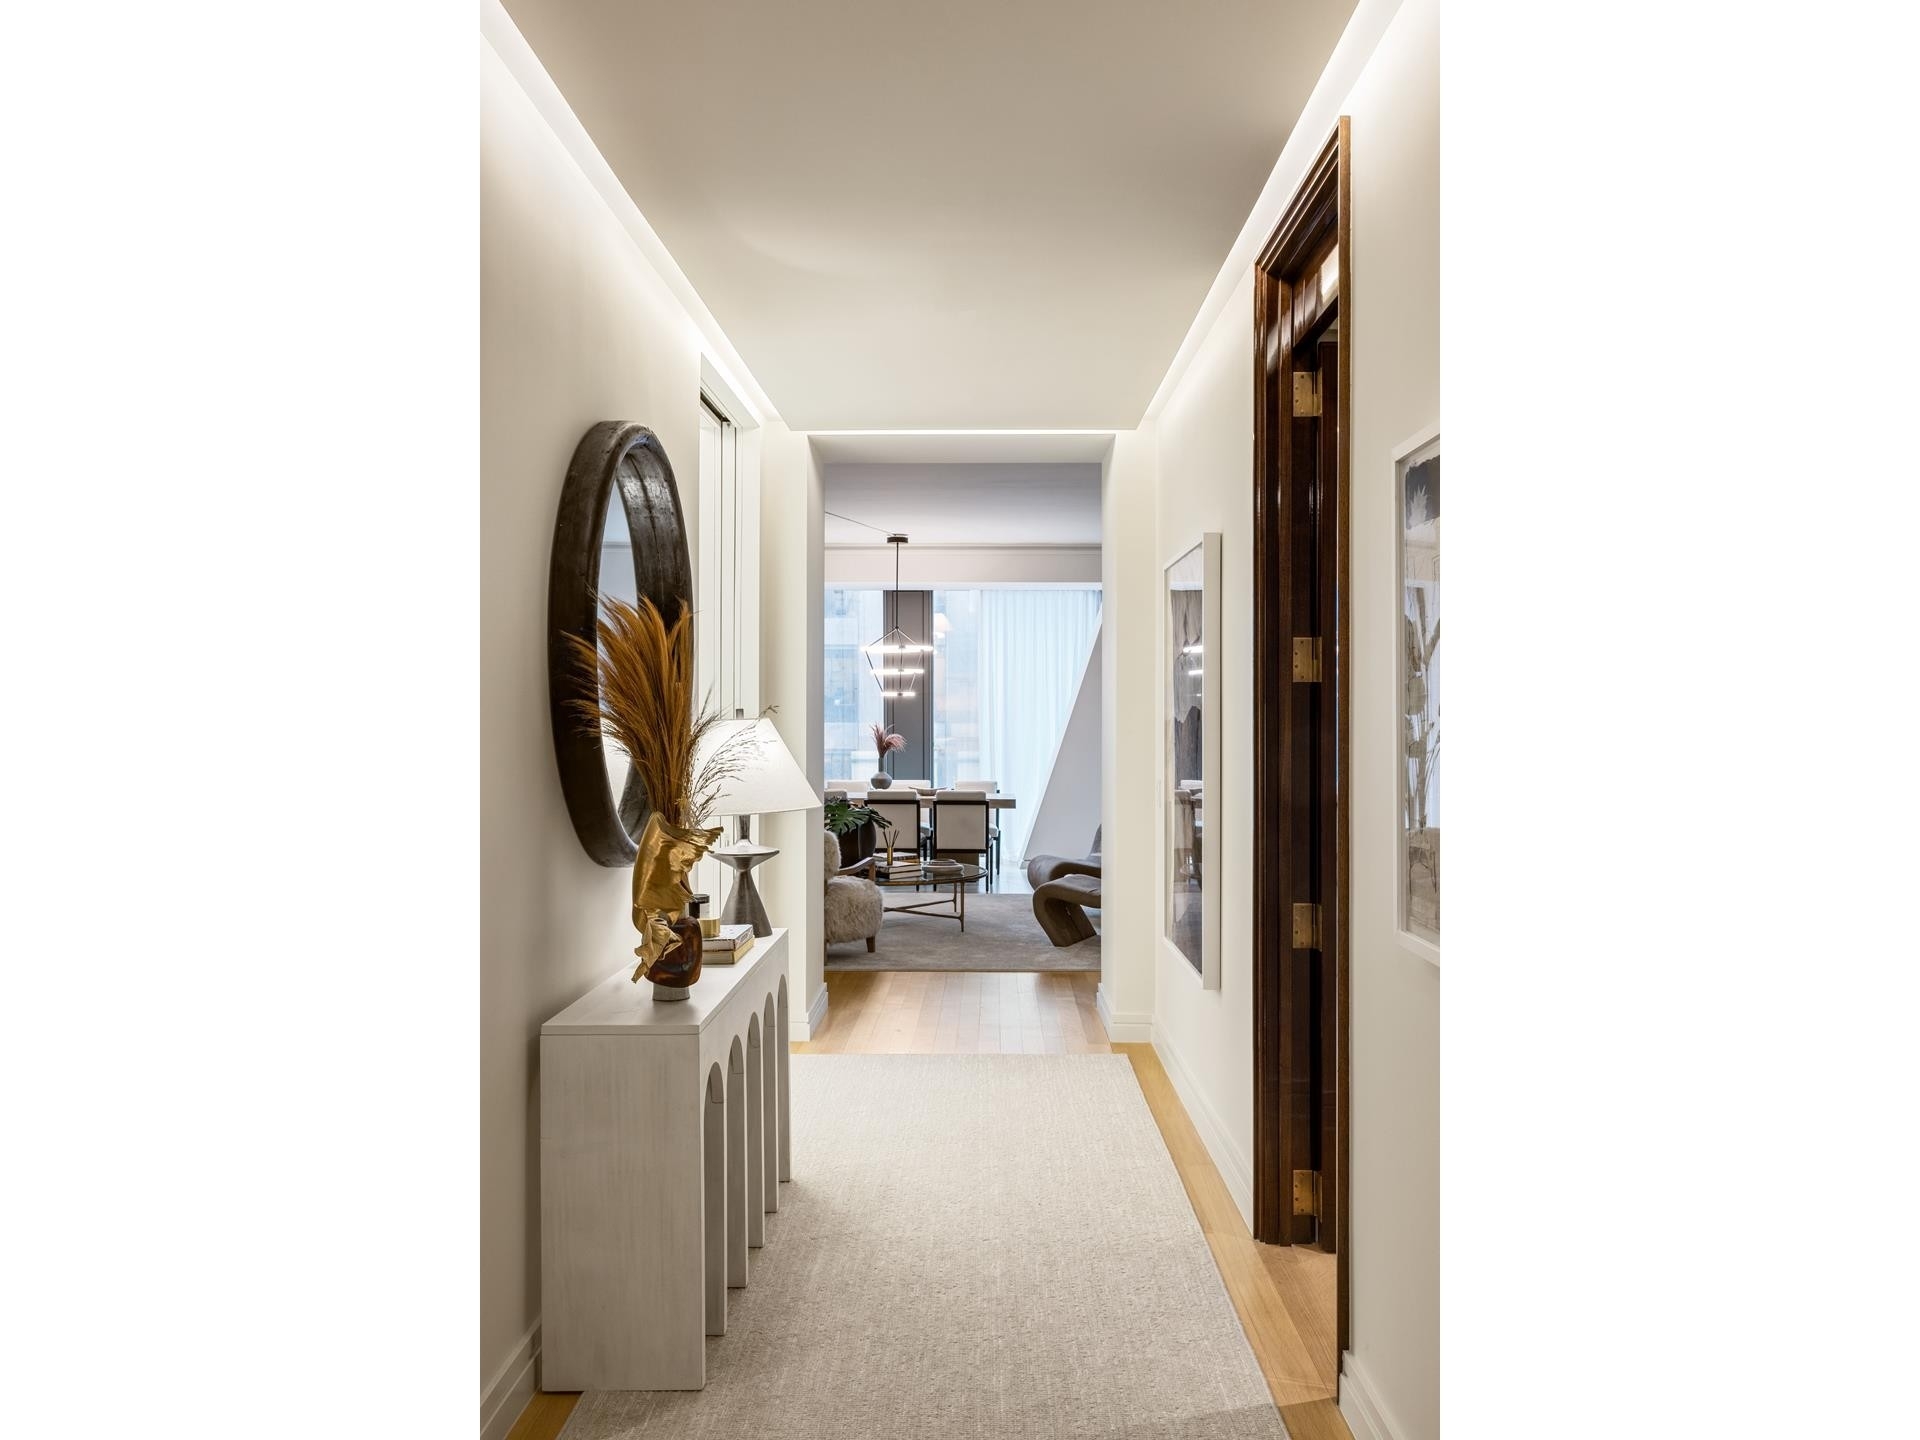 Condominium for Sale at 53W53, 53 53RD ST W, 35C Midtown West, New York, New York 10019